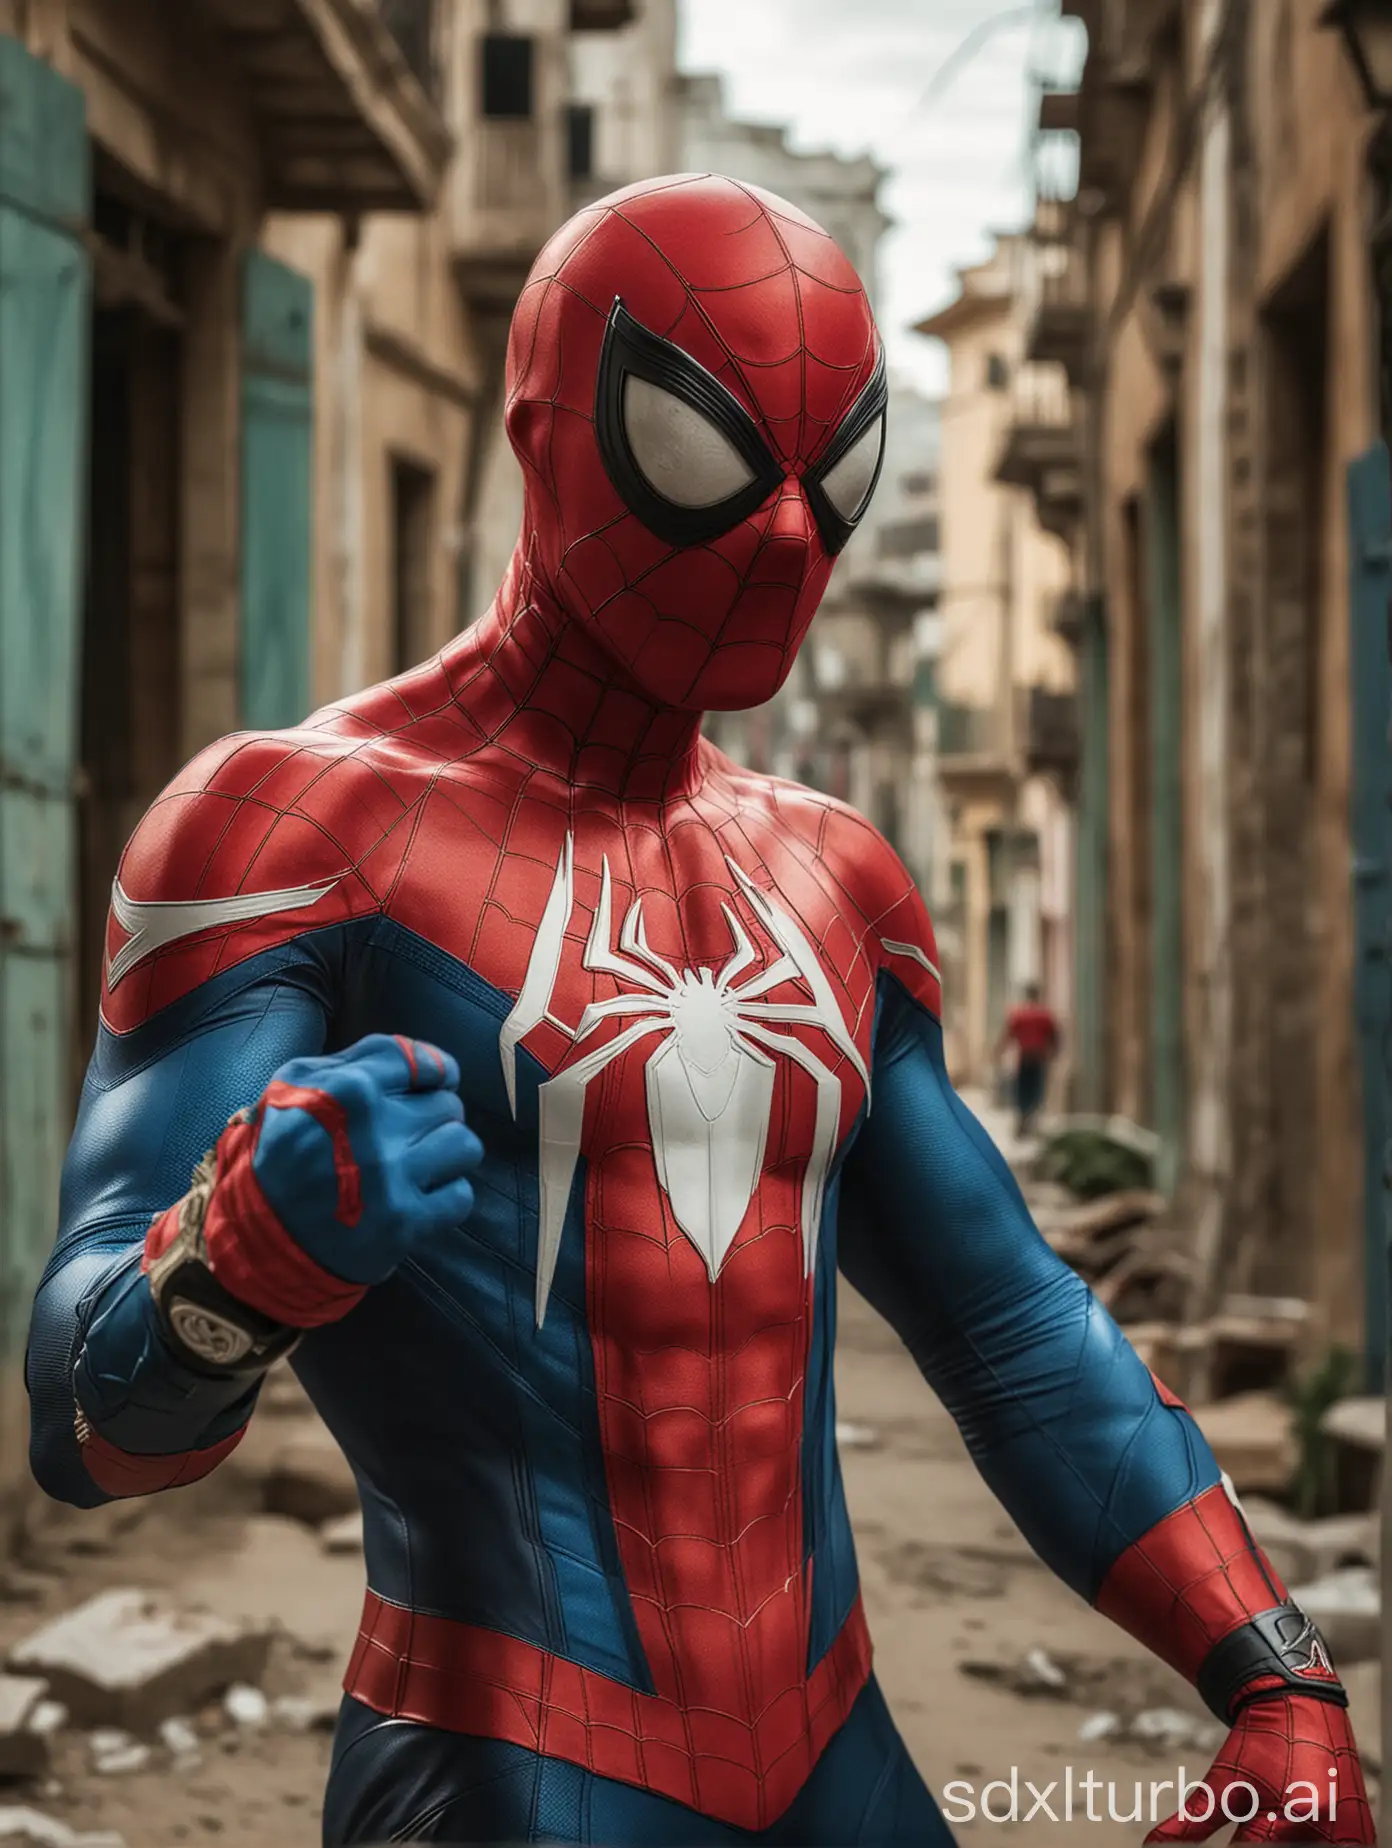 Spiderman Cuban flag colors suit an the mask off in his hand in a cool pose. showing his face and the mask on the hand
